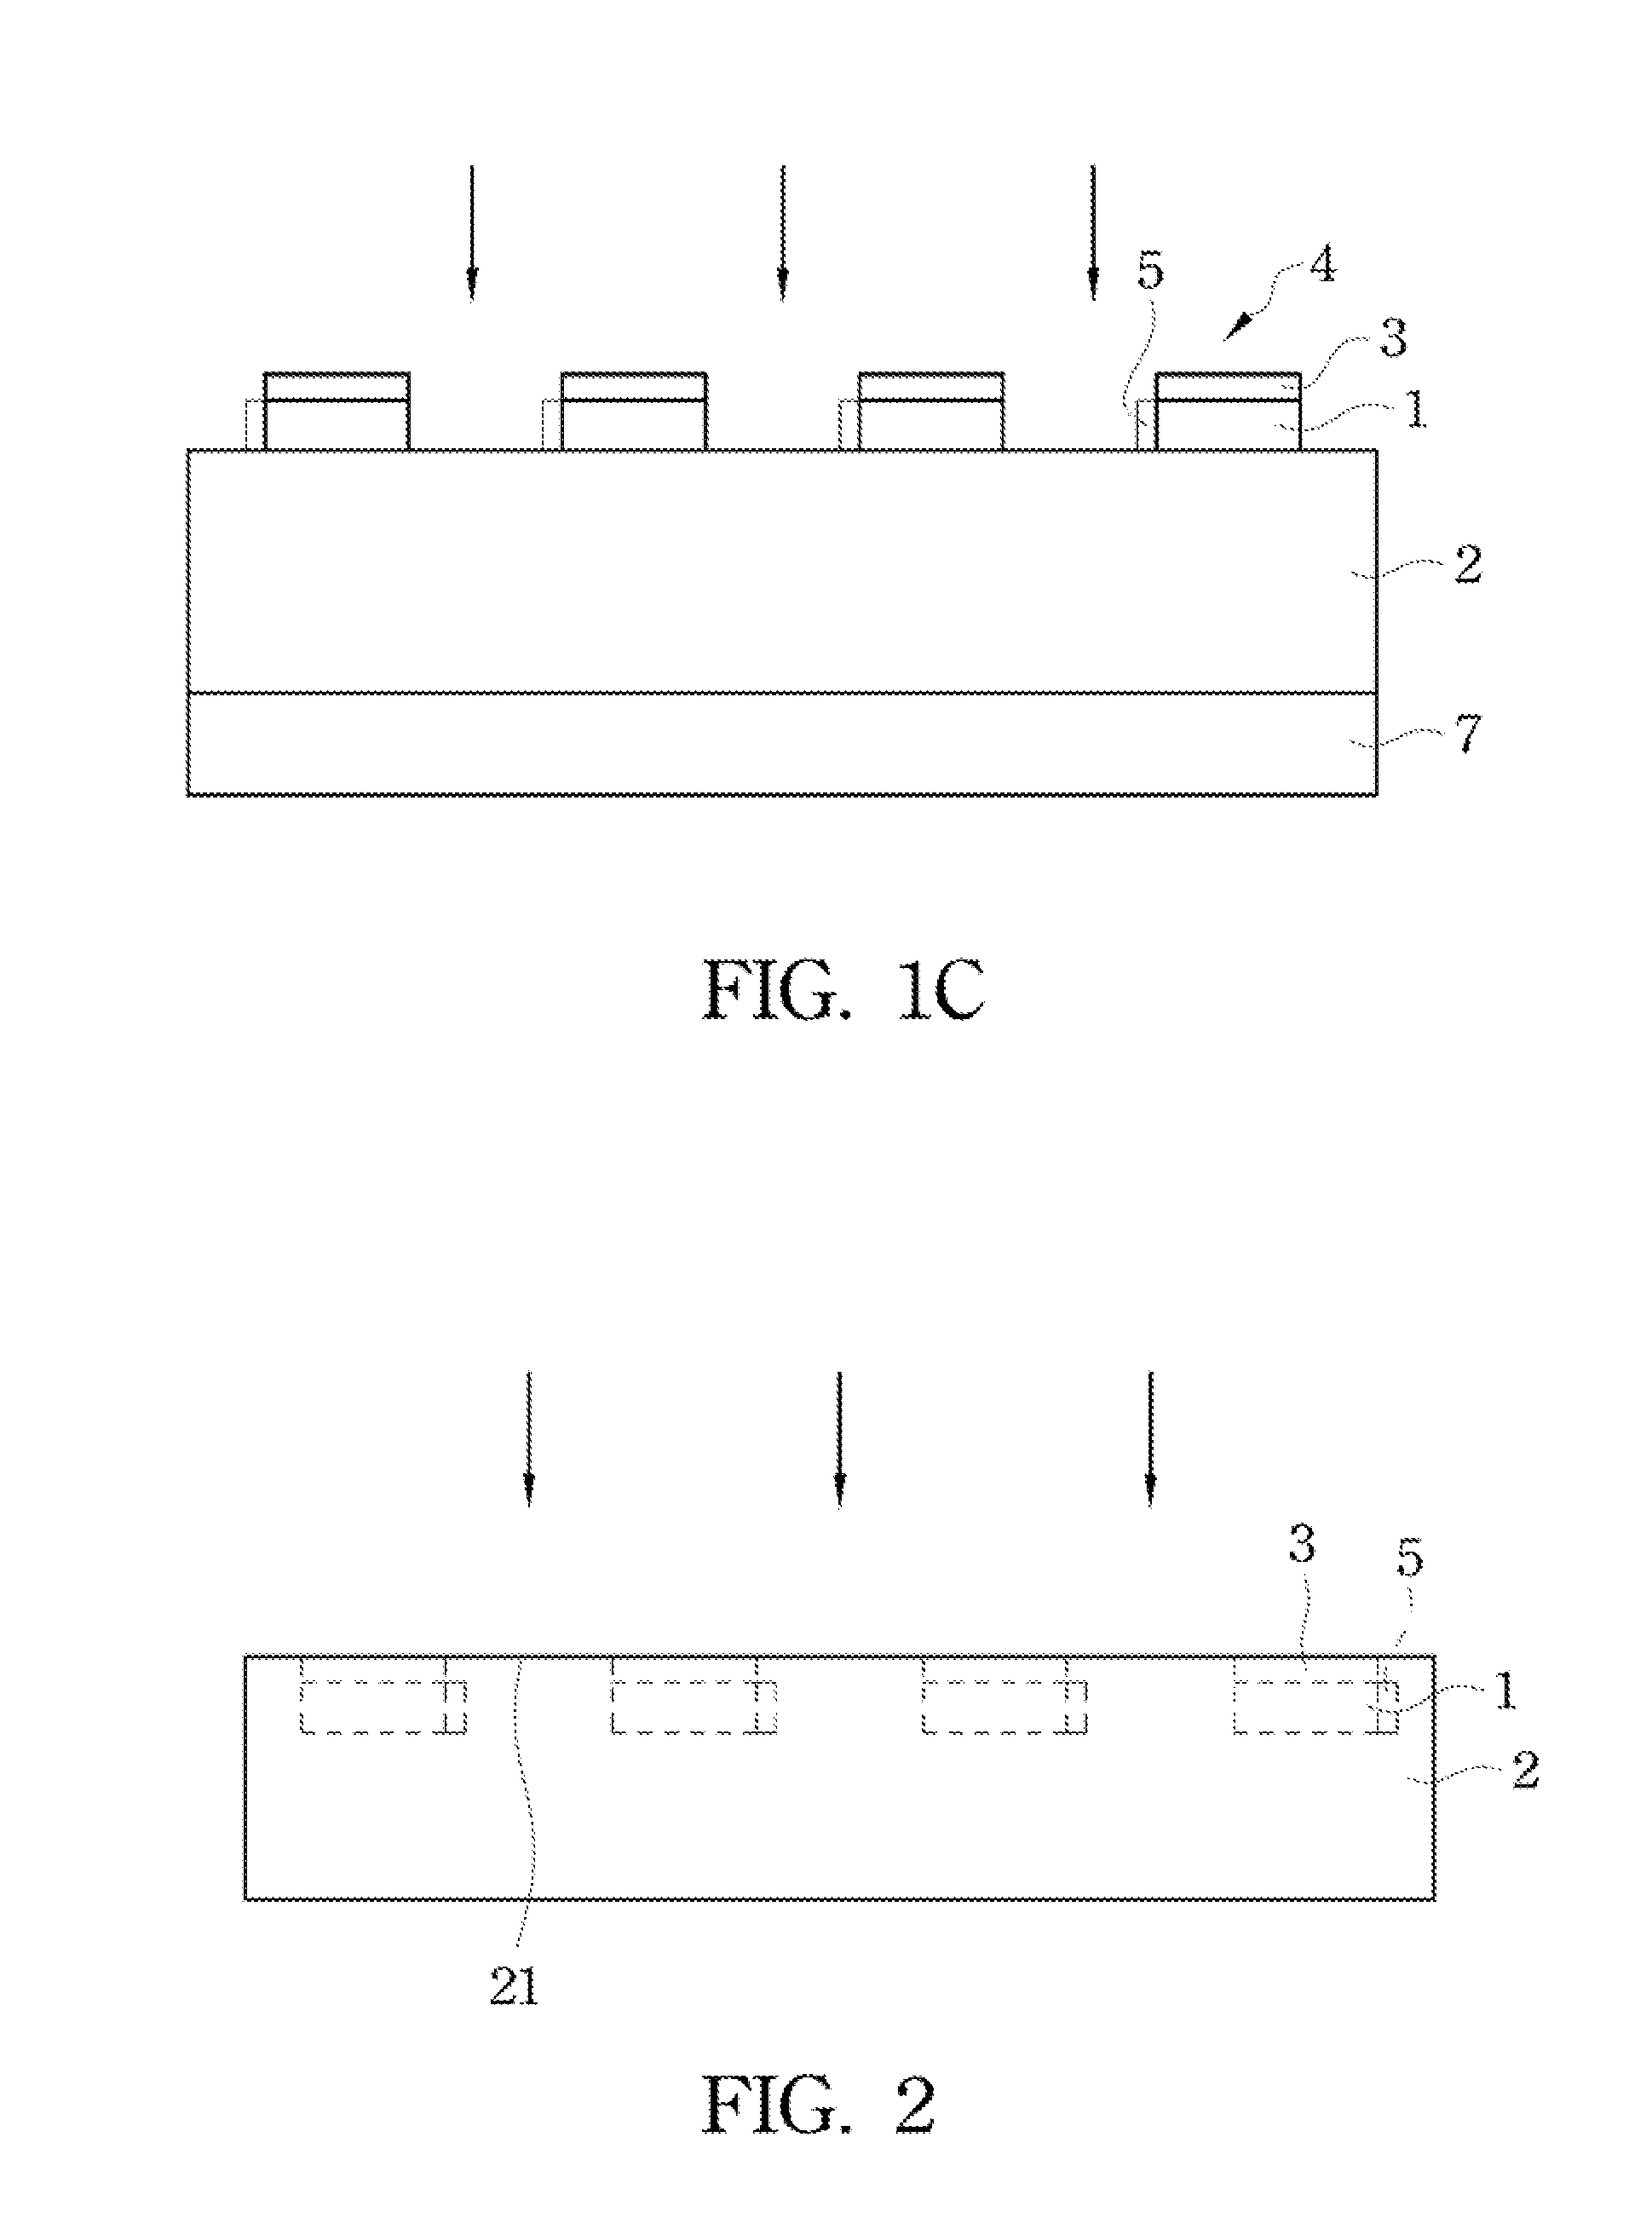 Distributed filtering and sensing structure and optical device containing the same